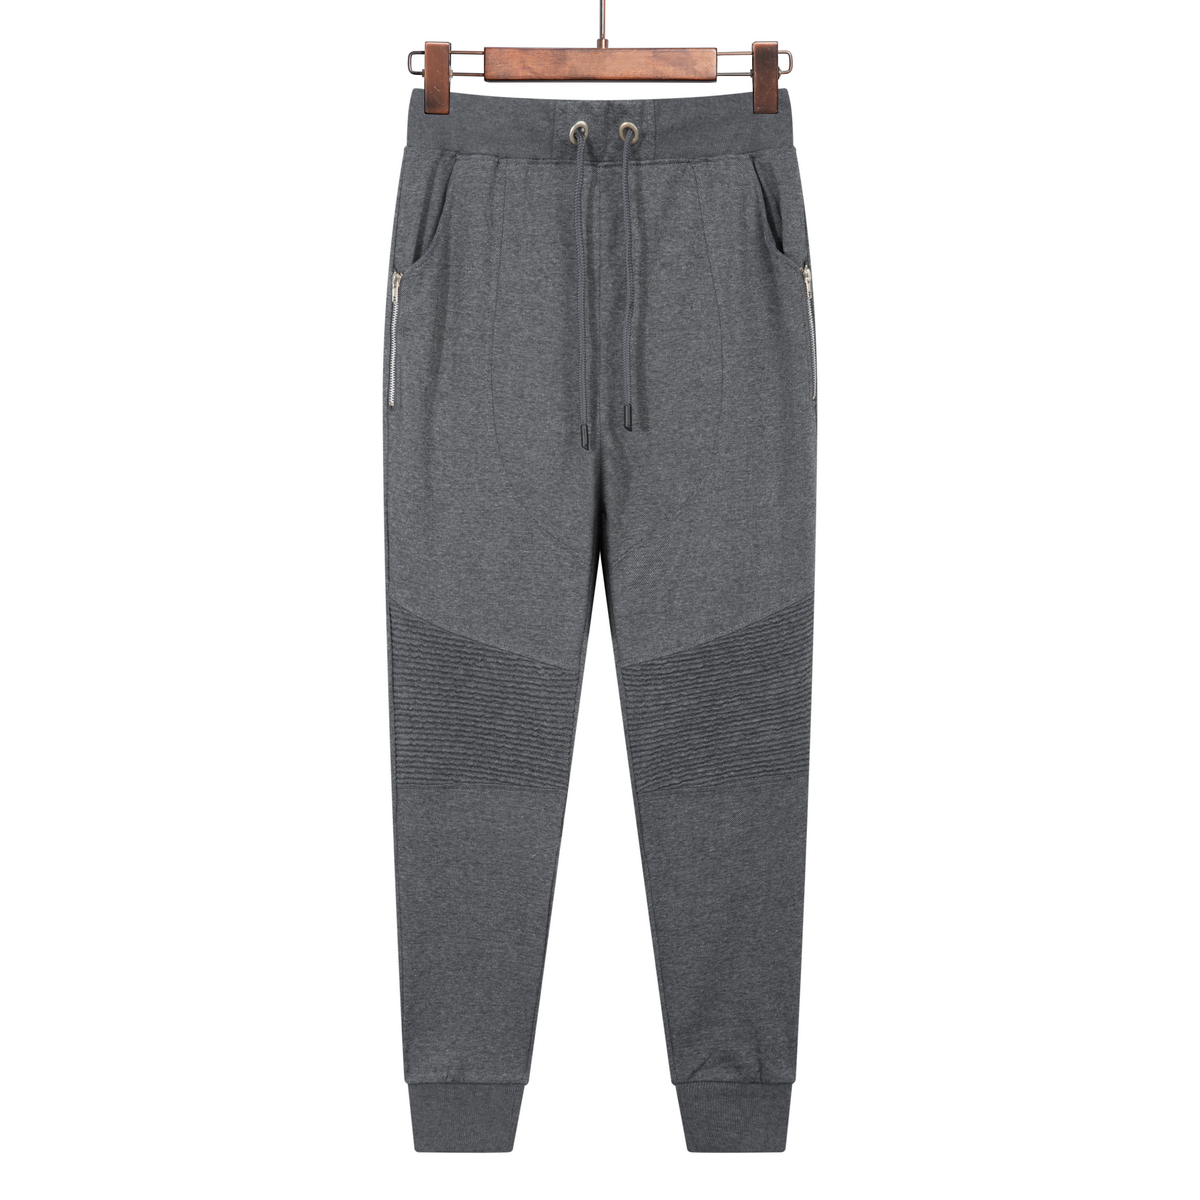 men's joggers with two zipper